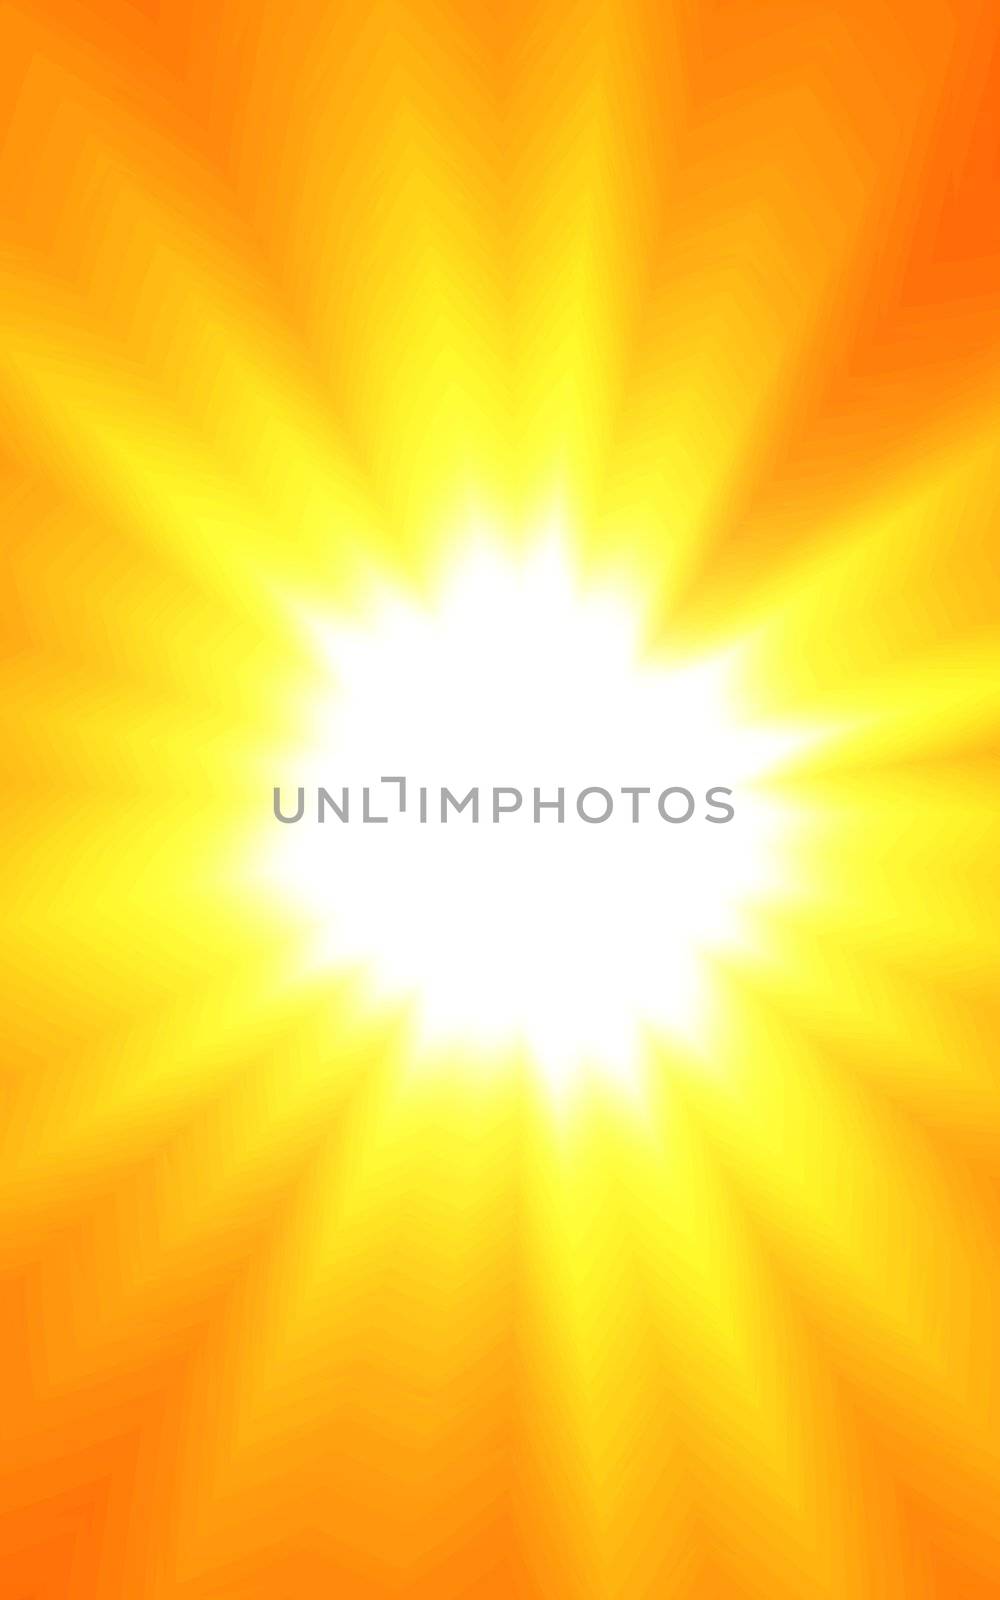 abstract sun or explosion background with copyspace for text message